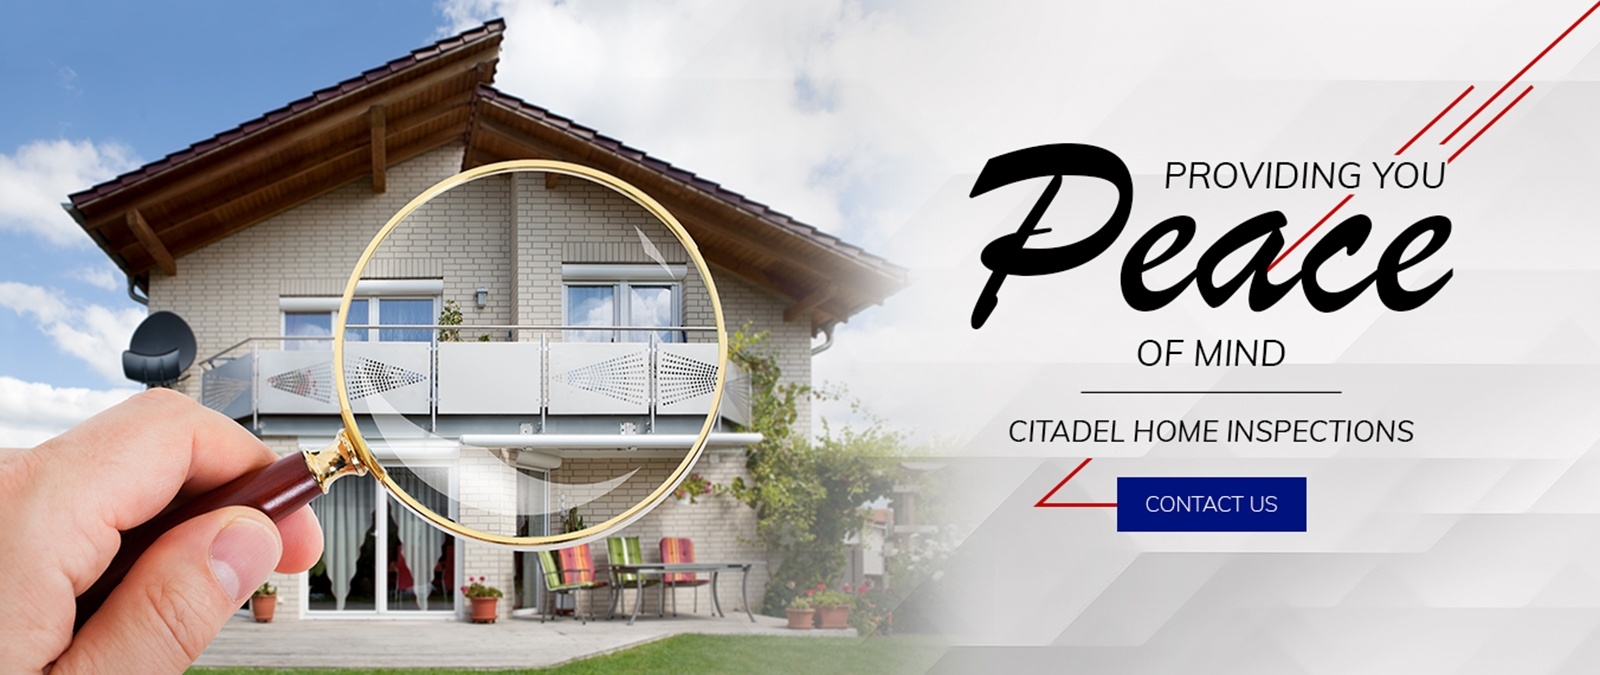 Providing you Peace of Mind - Citadel Home Inspections